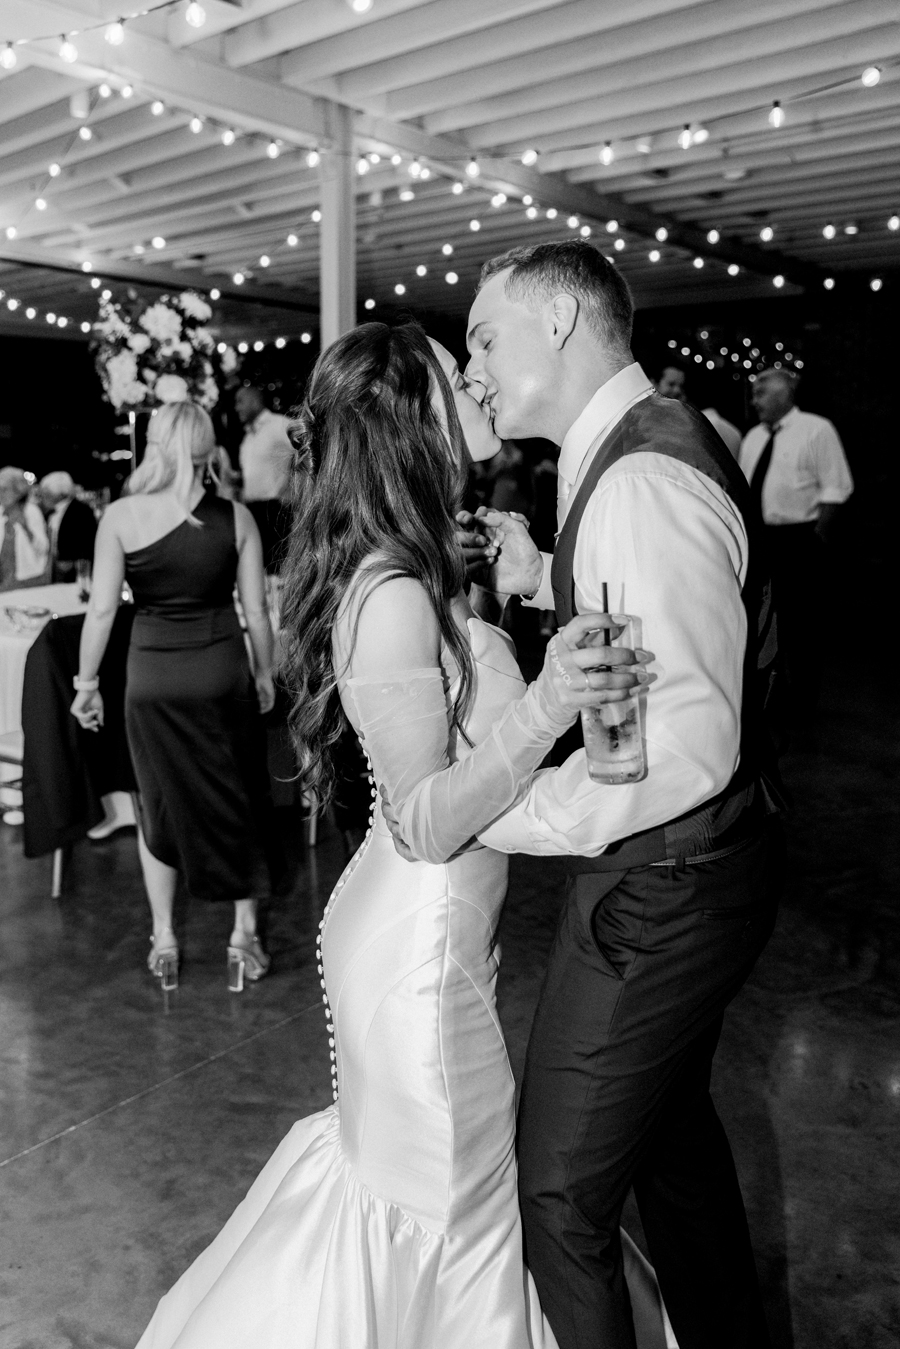 The bride and groom dance during their reception of their The Atrium on Tenth wedding in Columbia, Missouri by Love Tree Studios.